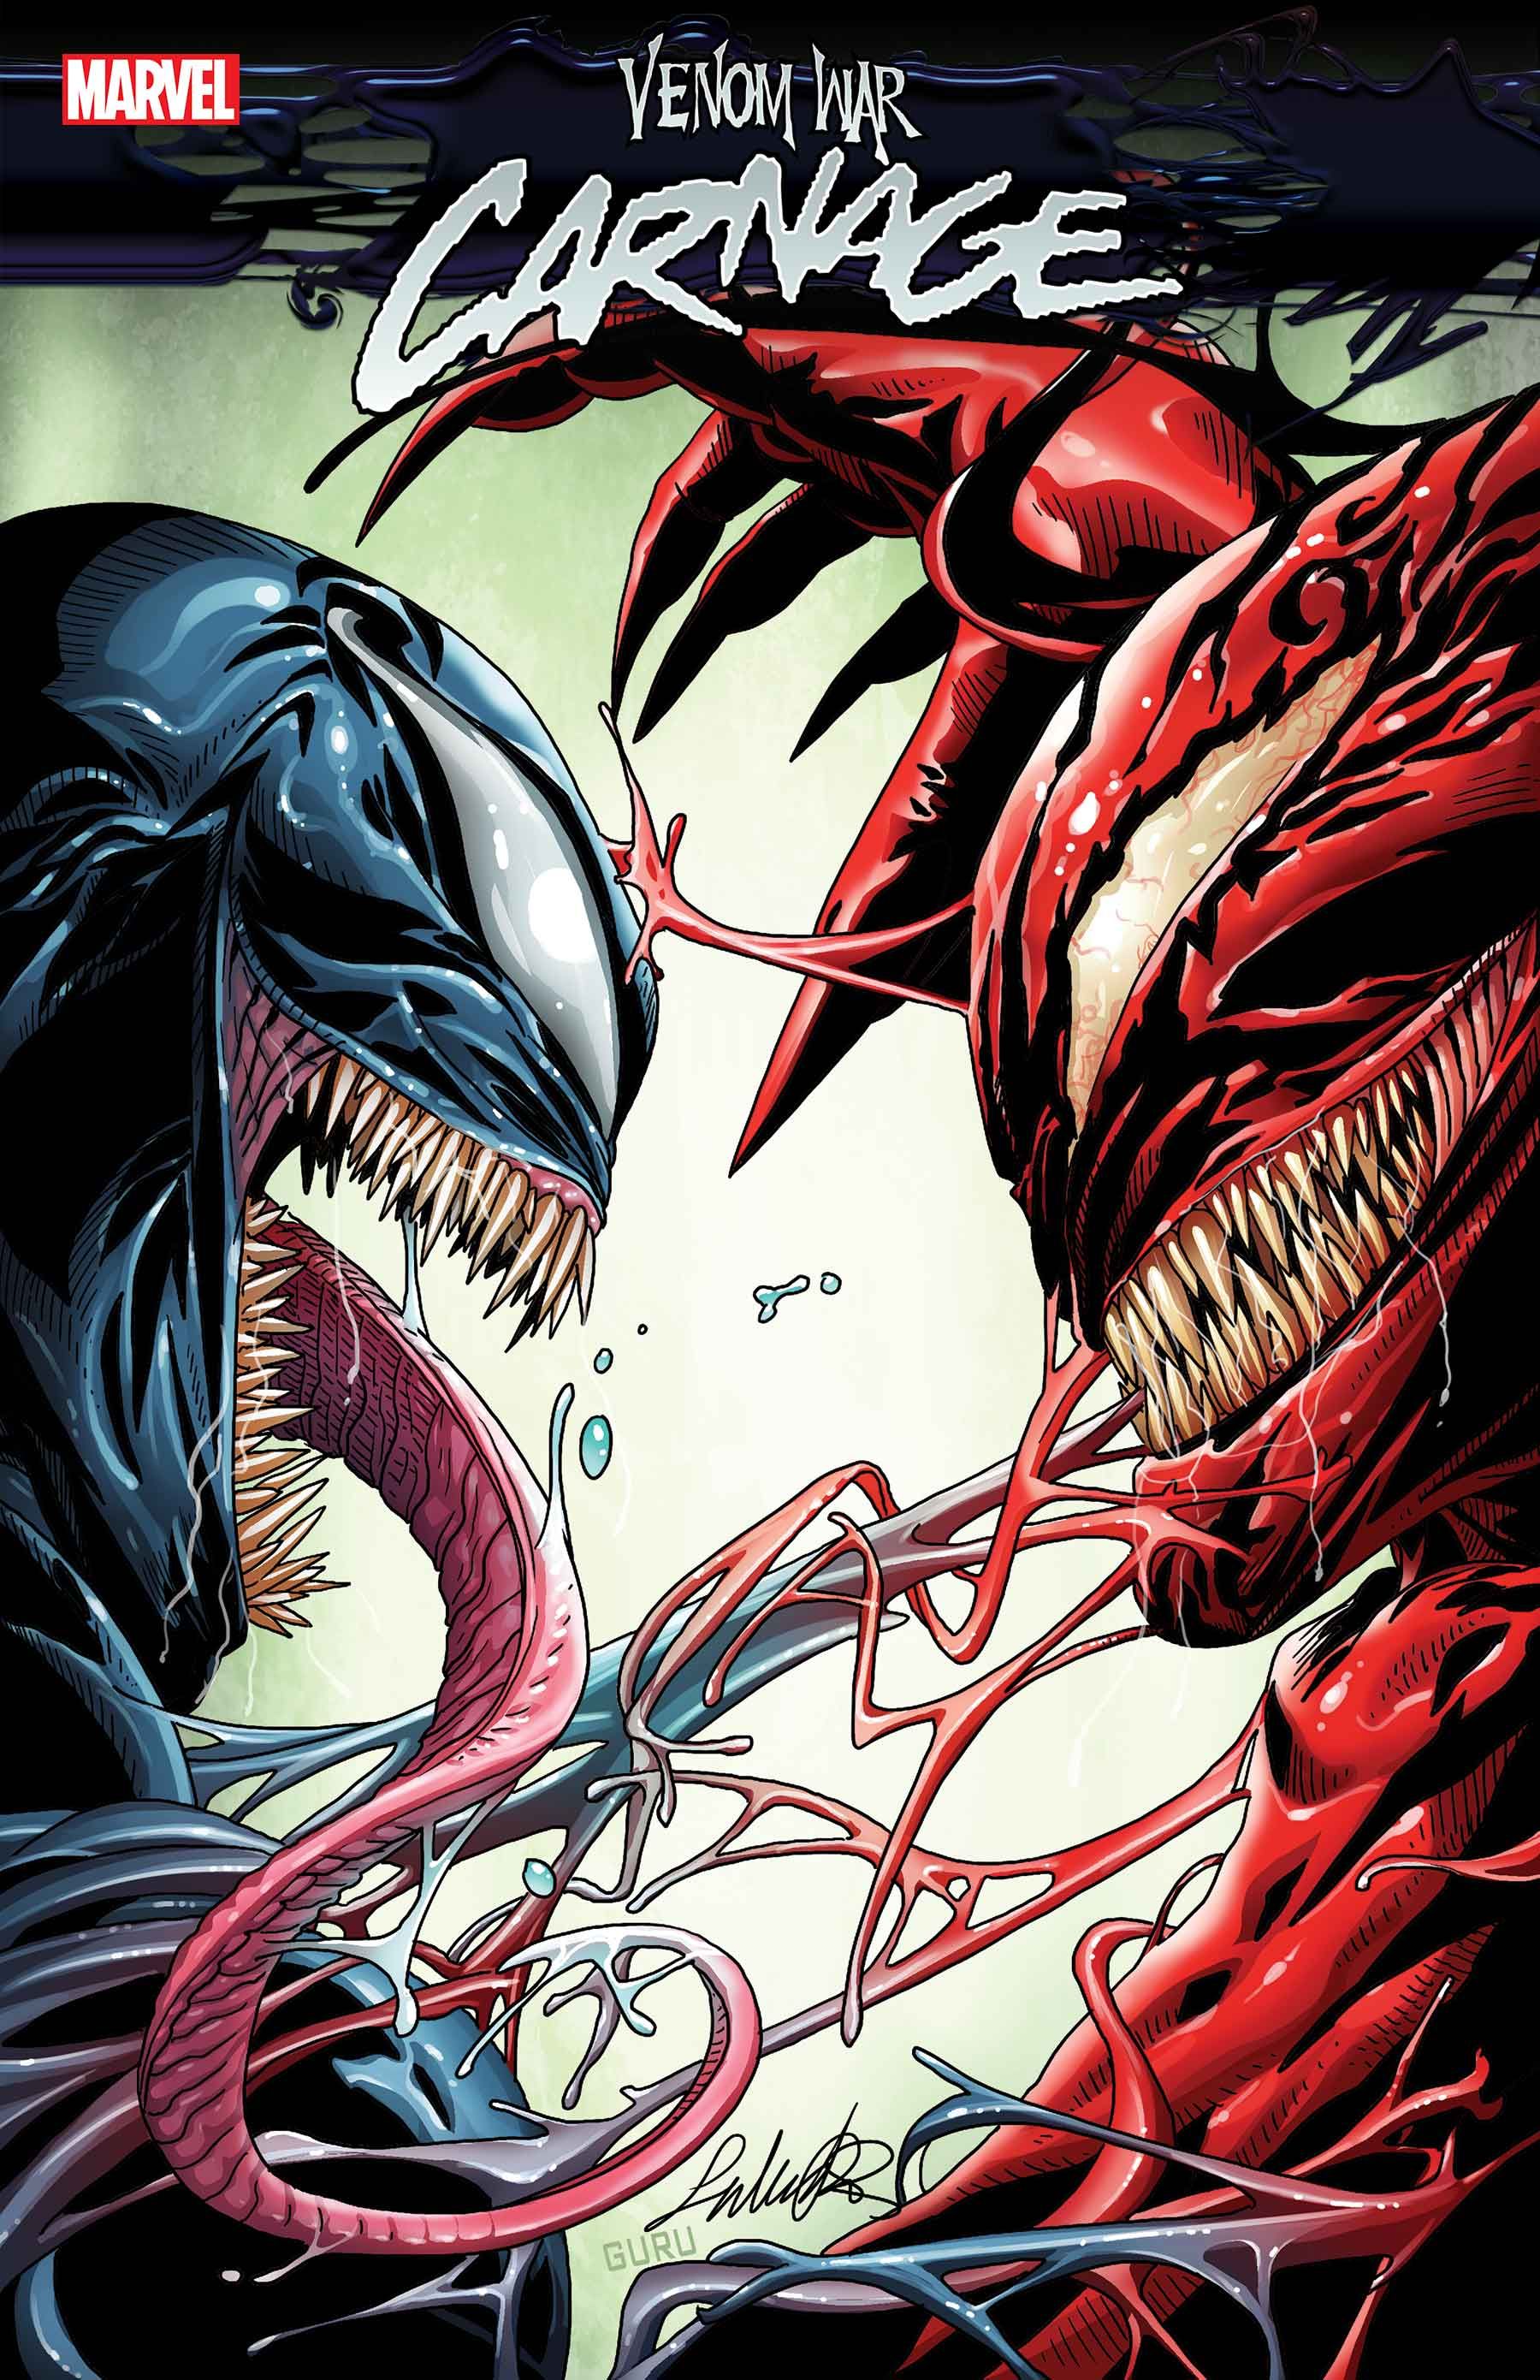 The cover of Venom War: Carnage #1